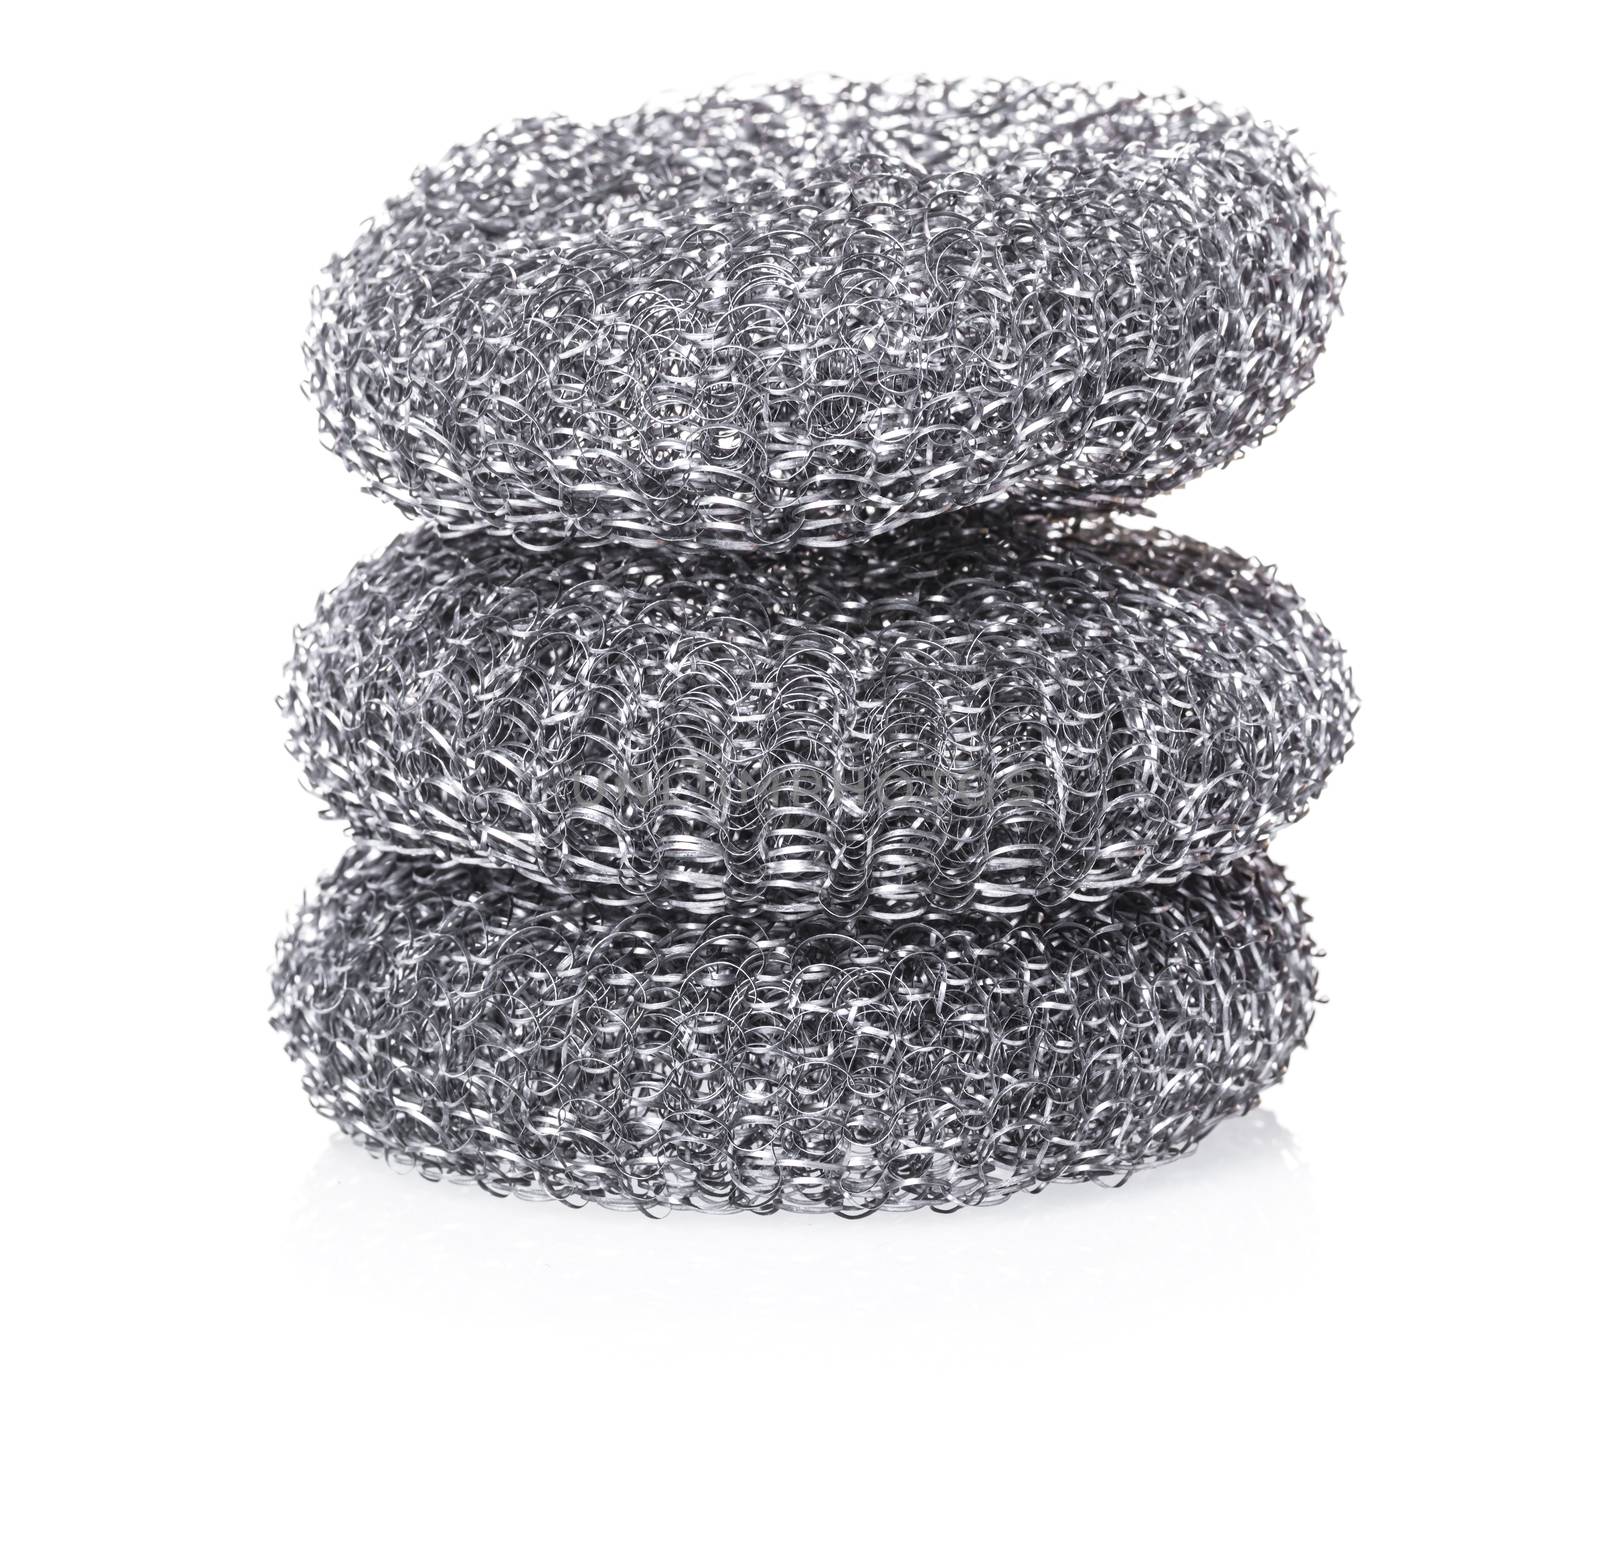 metallic sponge for dishes by MegaArt